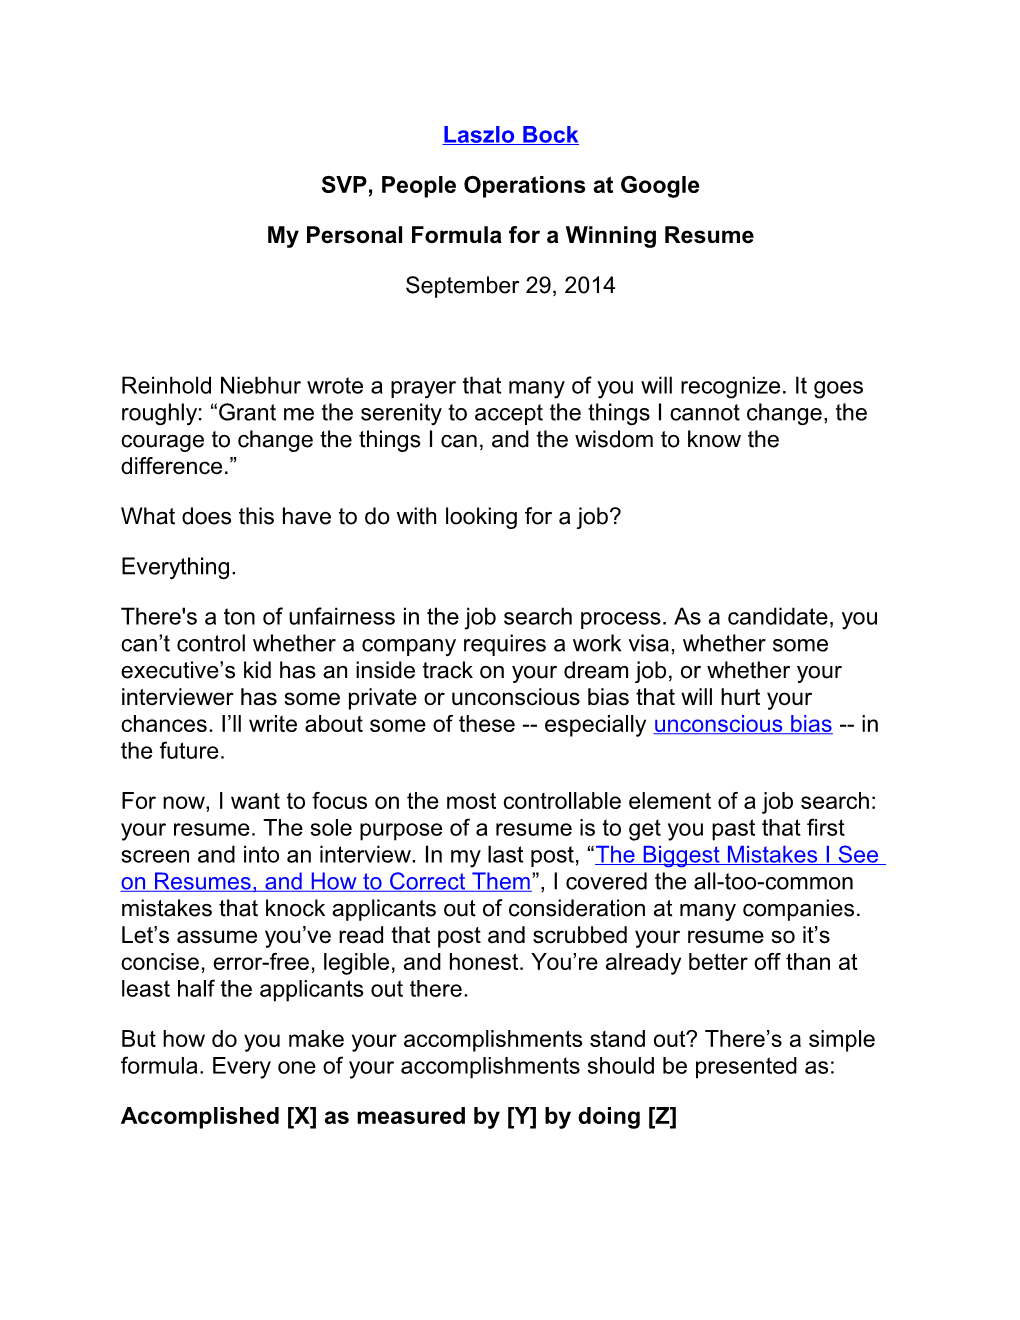 SVP, People Operations at Google